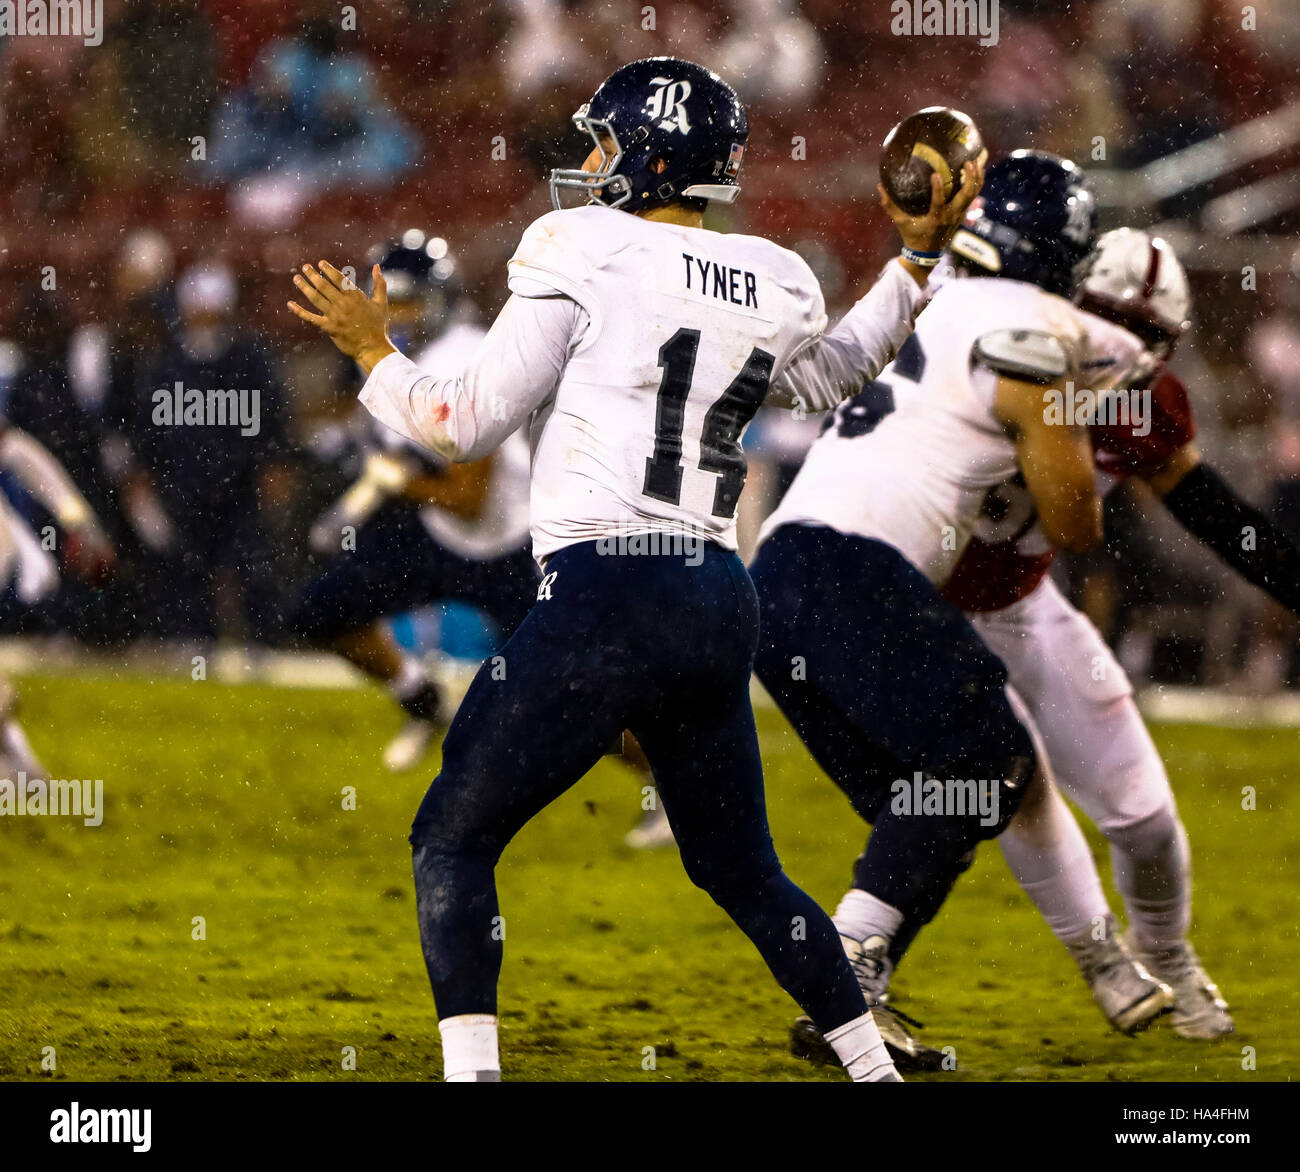 Palo Alto, California, USA. 26th Nov, 2016. Rice Quarterback Jackson Tyner (14) readies for a pass vs Stanford in NCAA football action at Stanford University, featuring the Rice Owls visiting the Stanford Cardinal. Stanford won the game 41-17. © Seth Riskin/ZUMA Wire/Alamy Live News Stock Photo